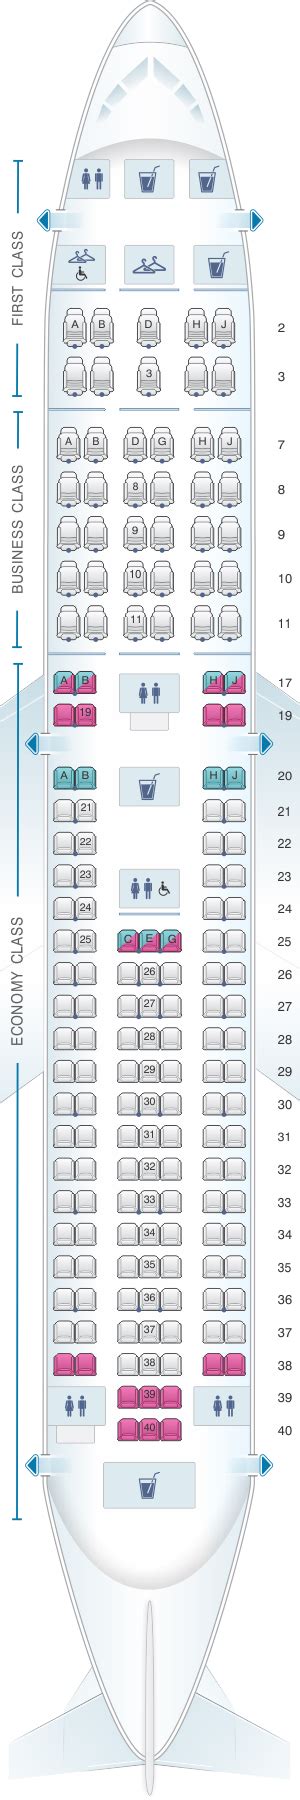 Seat Map Boeing American Airlines Best Seats In The Plane Momcute